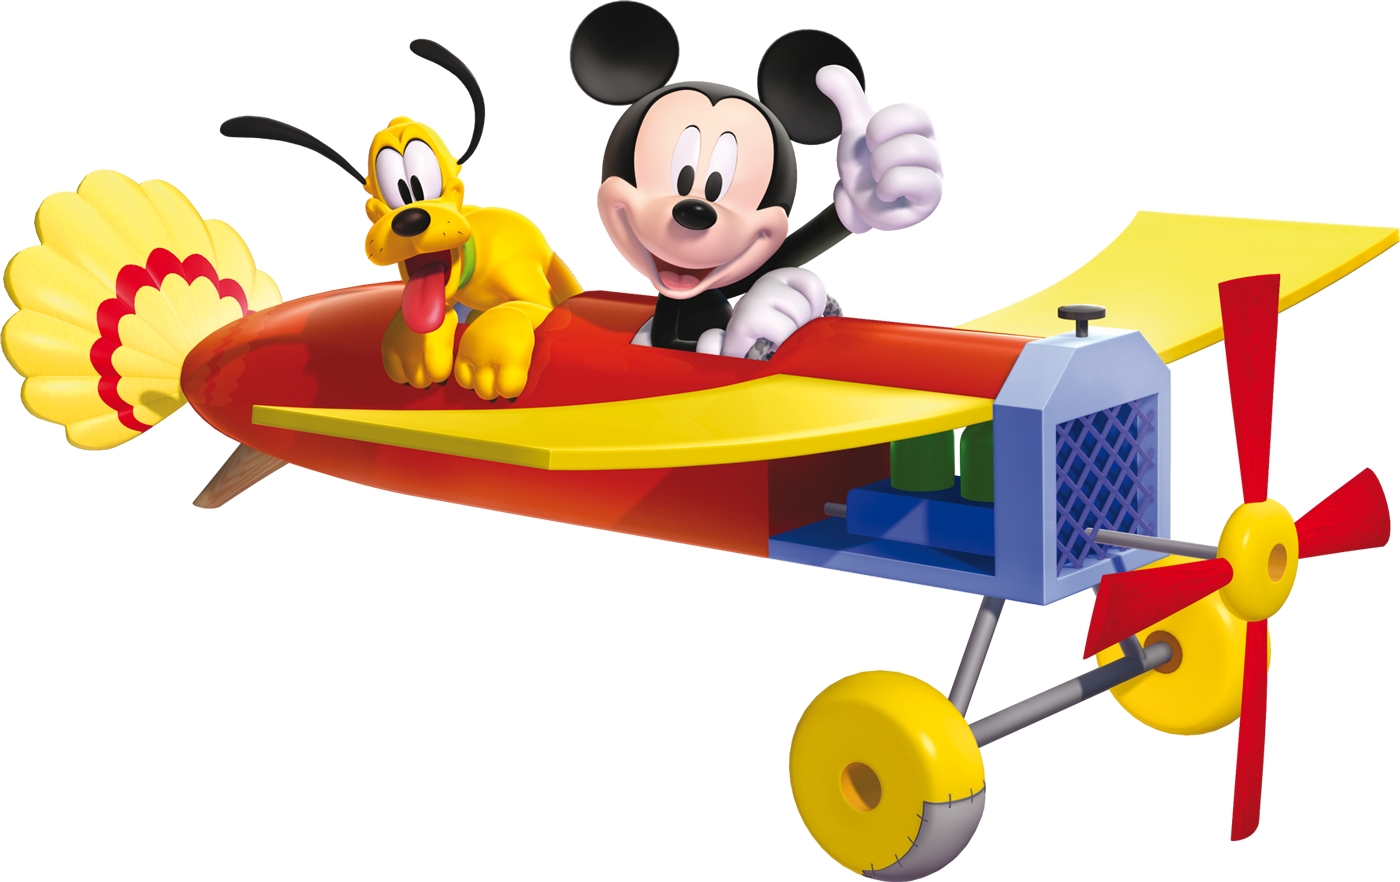 World of illusion starring. Clipart airplane minnie mouse